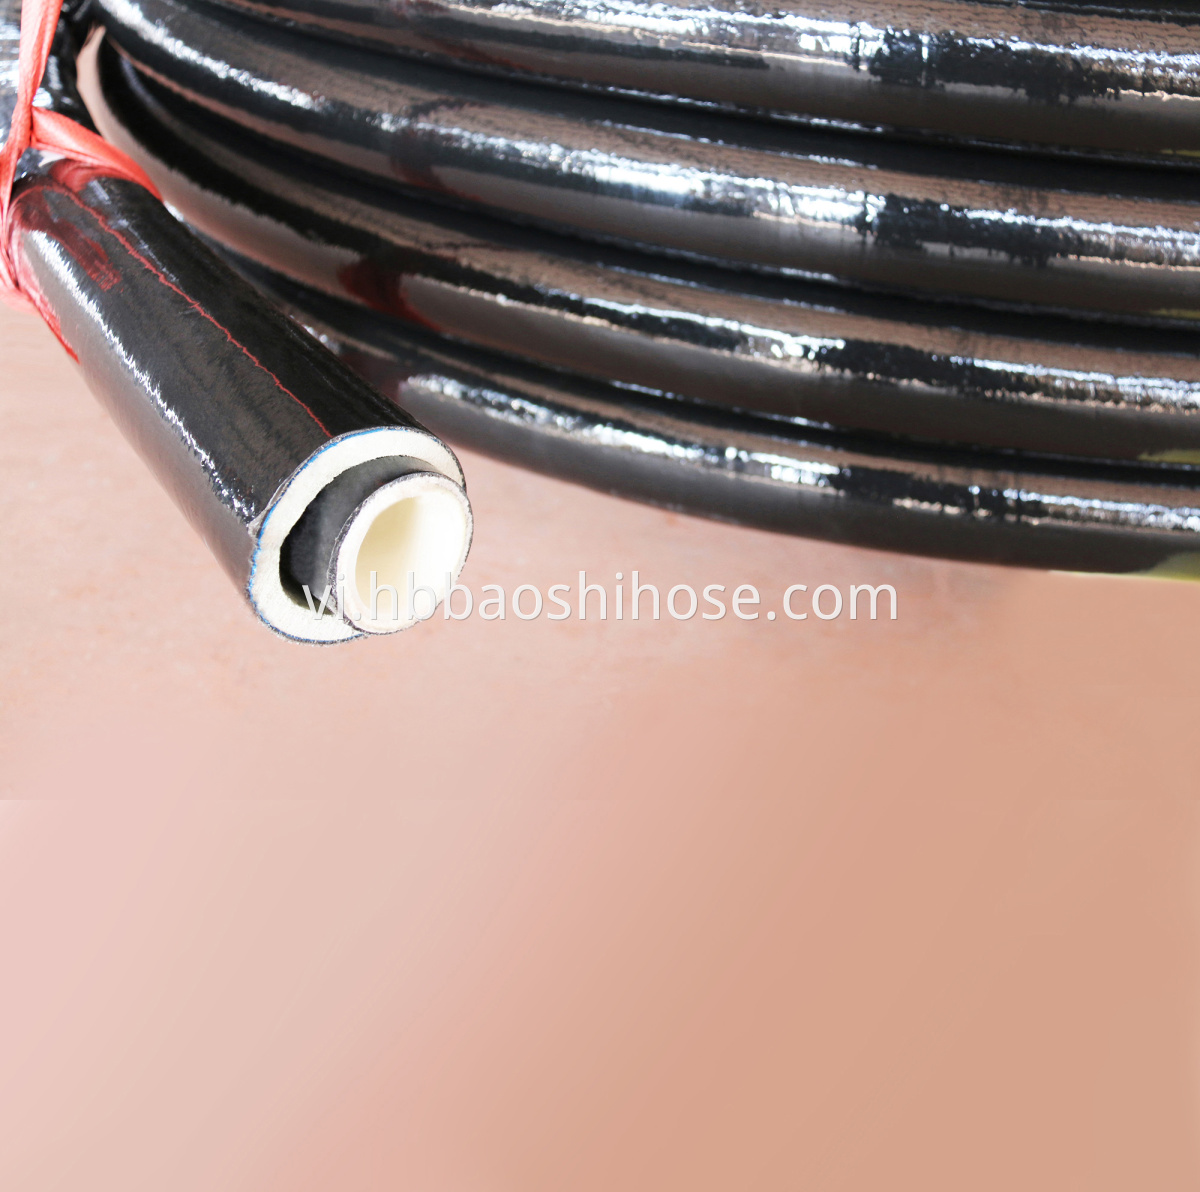 Alcohol Injection Pipe Series Flexible Composite Pipe 